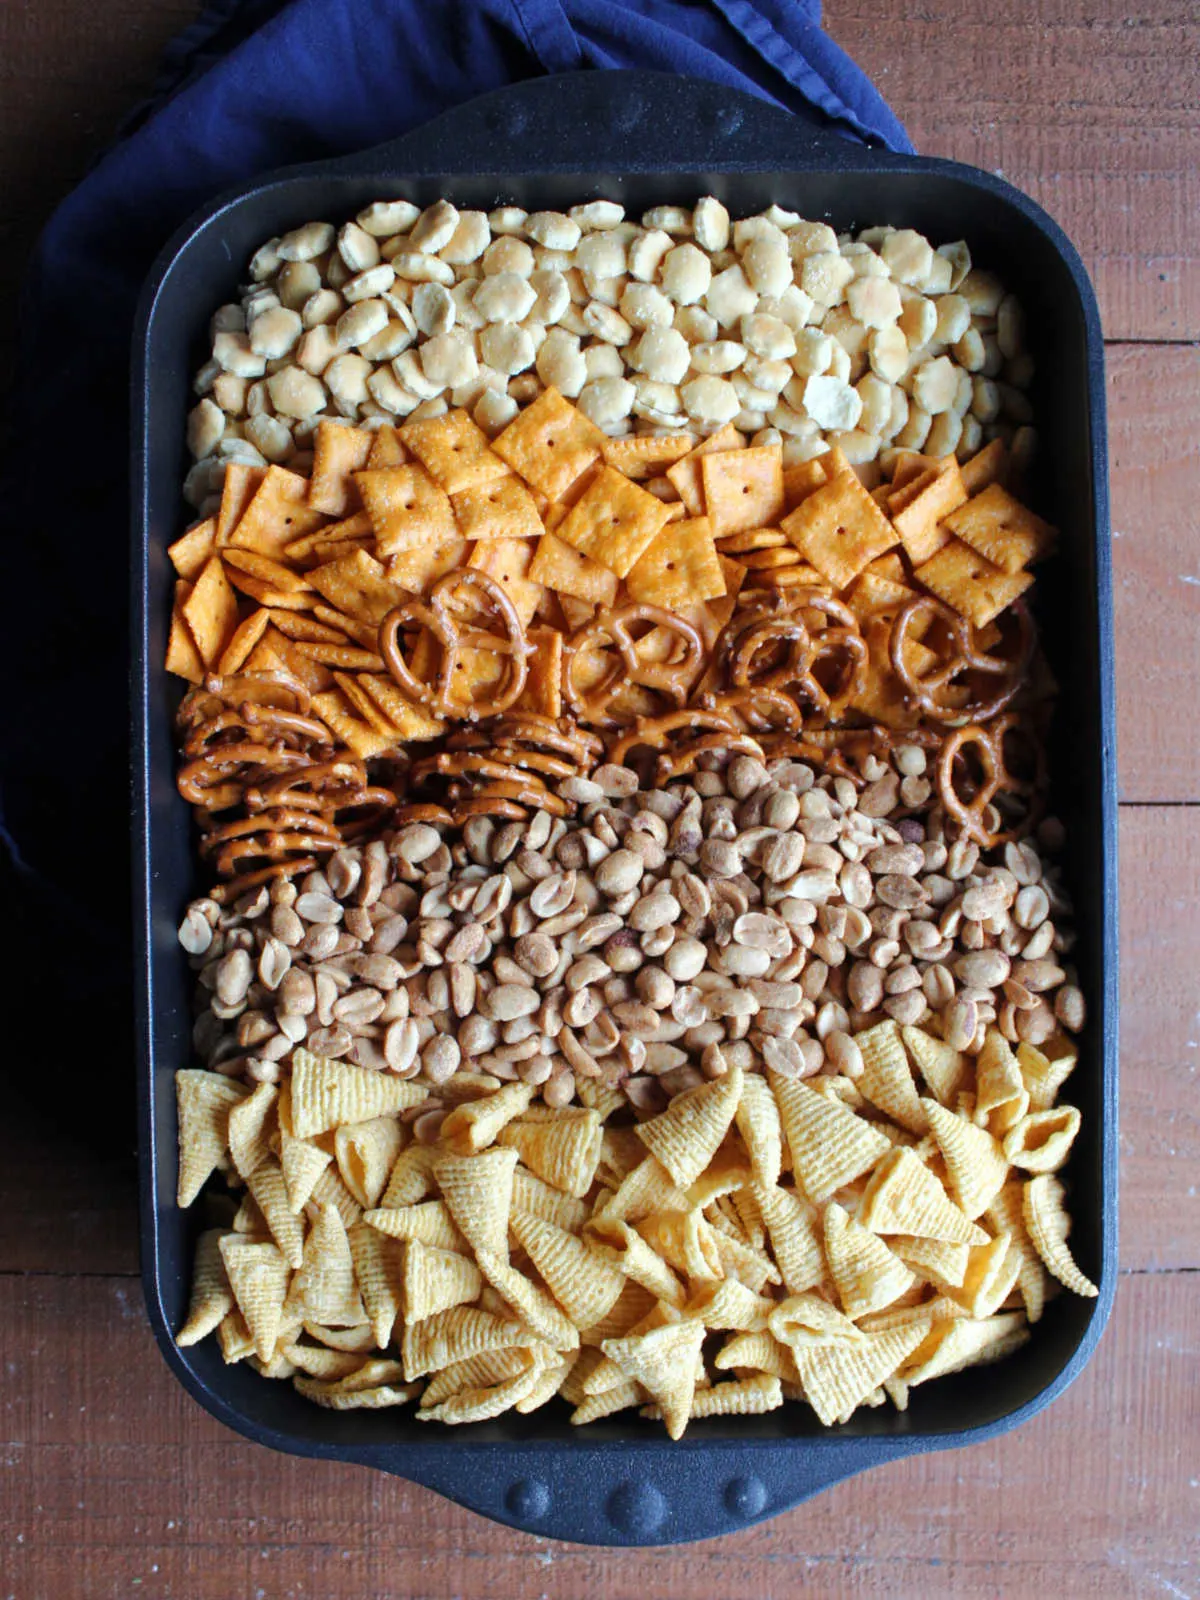 Large roasting pan filled with oyster crackers, cheese crackers, pretzel twists, peanuts, and bugles.